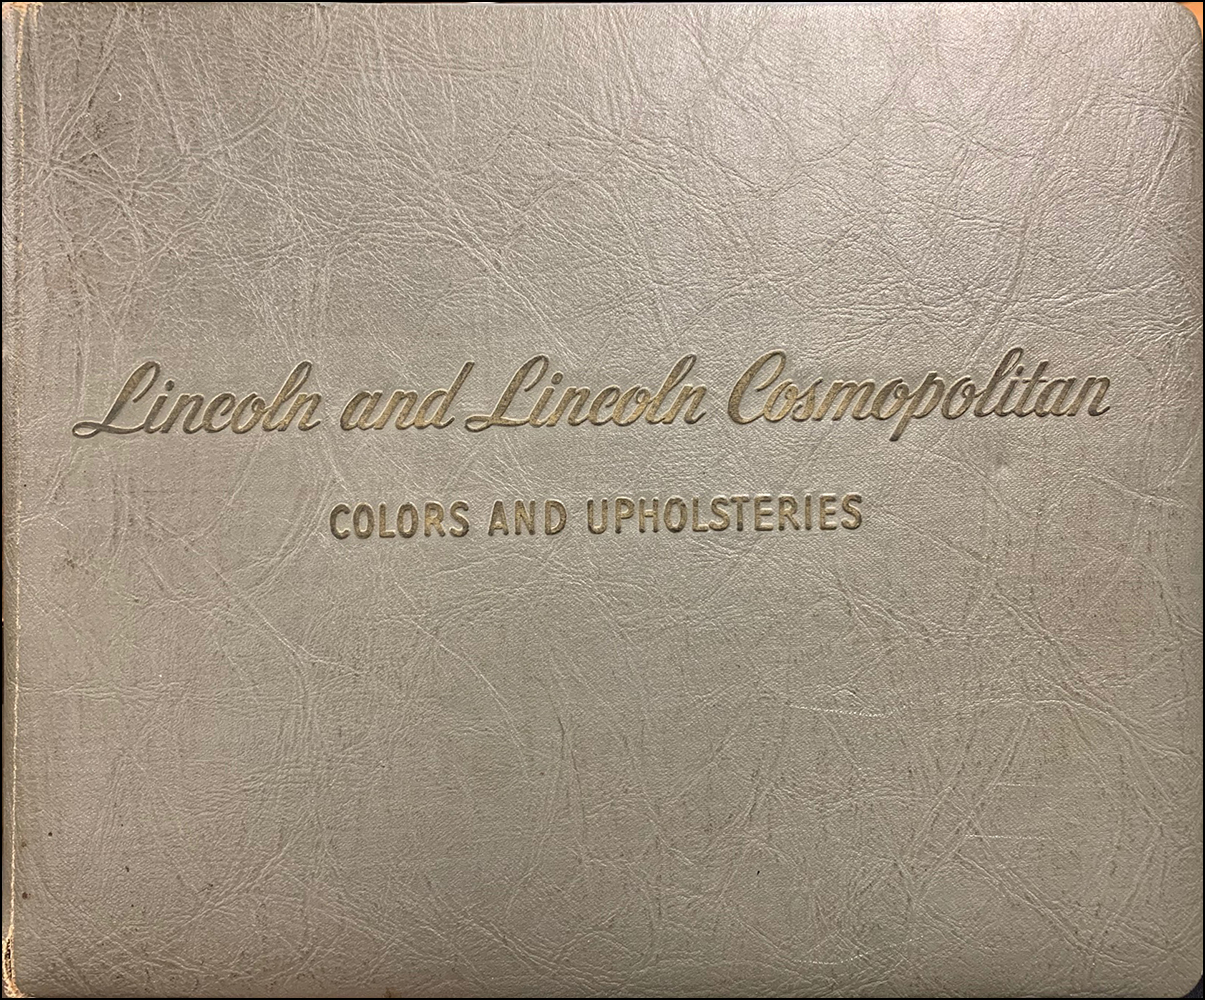 1951 Lincoln Color and Upholstery Dealer Album